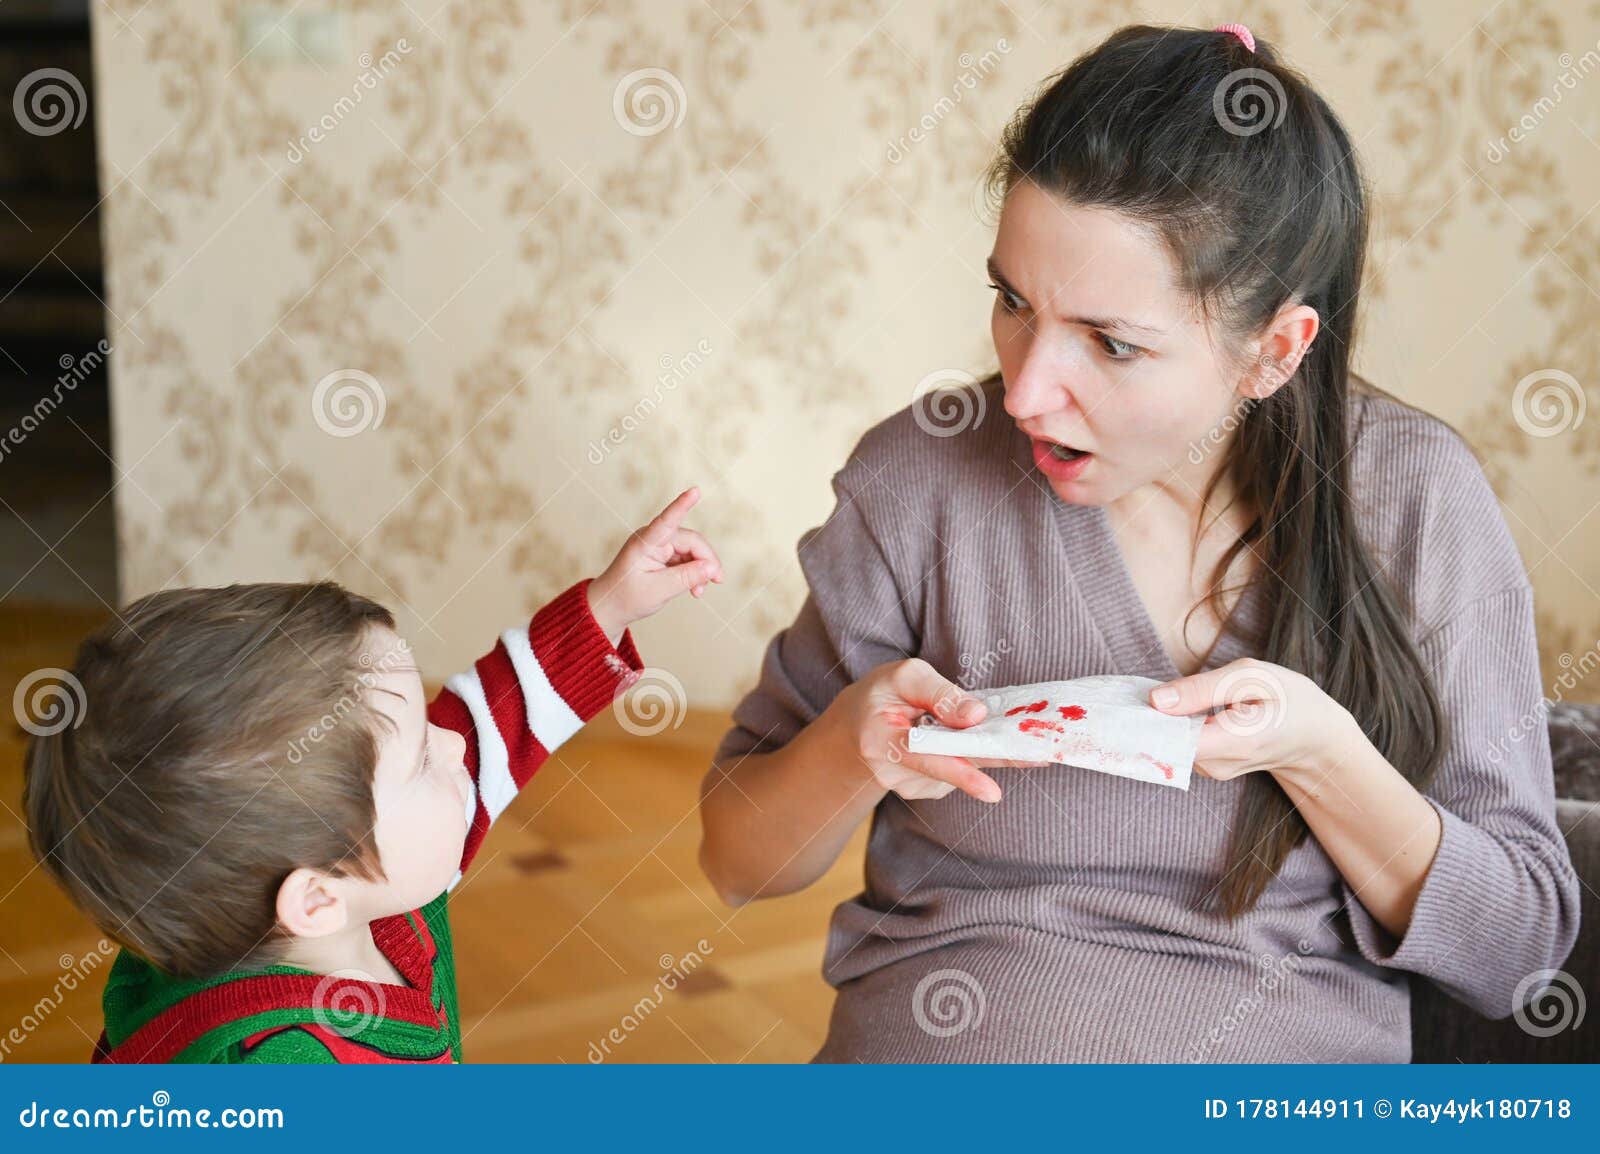 pregnant young woman scared with nosebleed. a little boy looks at his pregnant mom. healthcare and medical concept